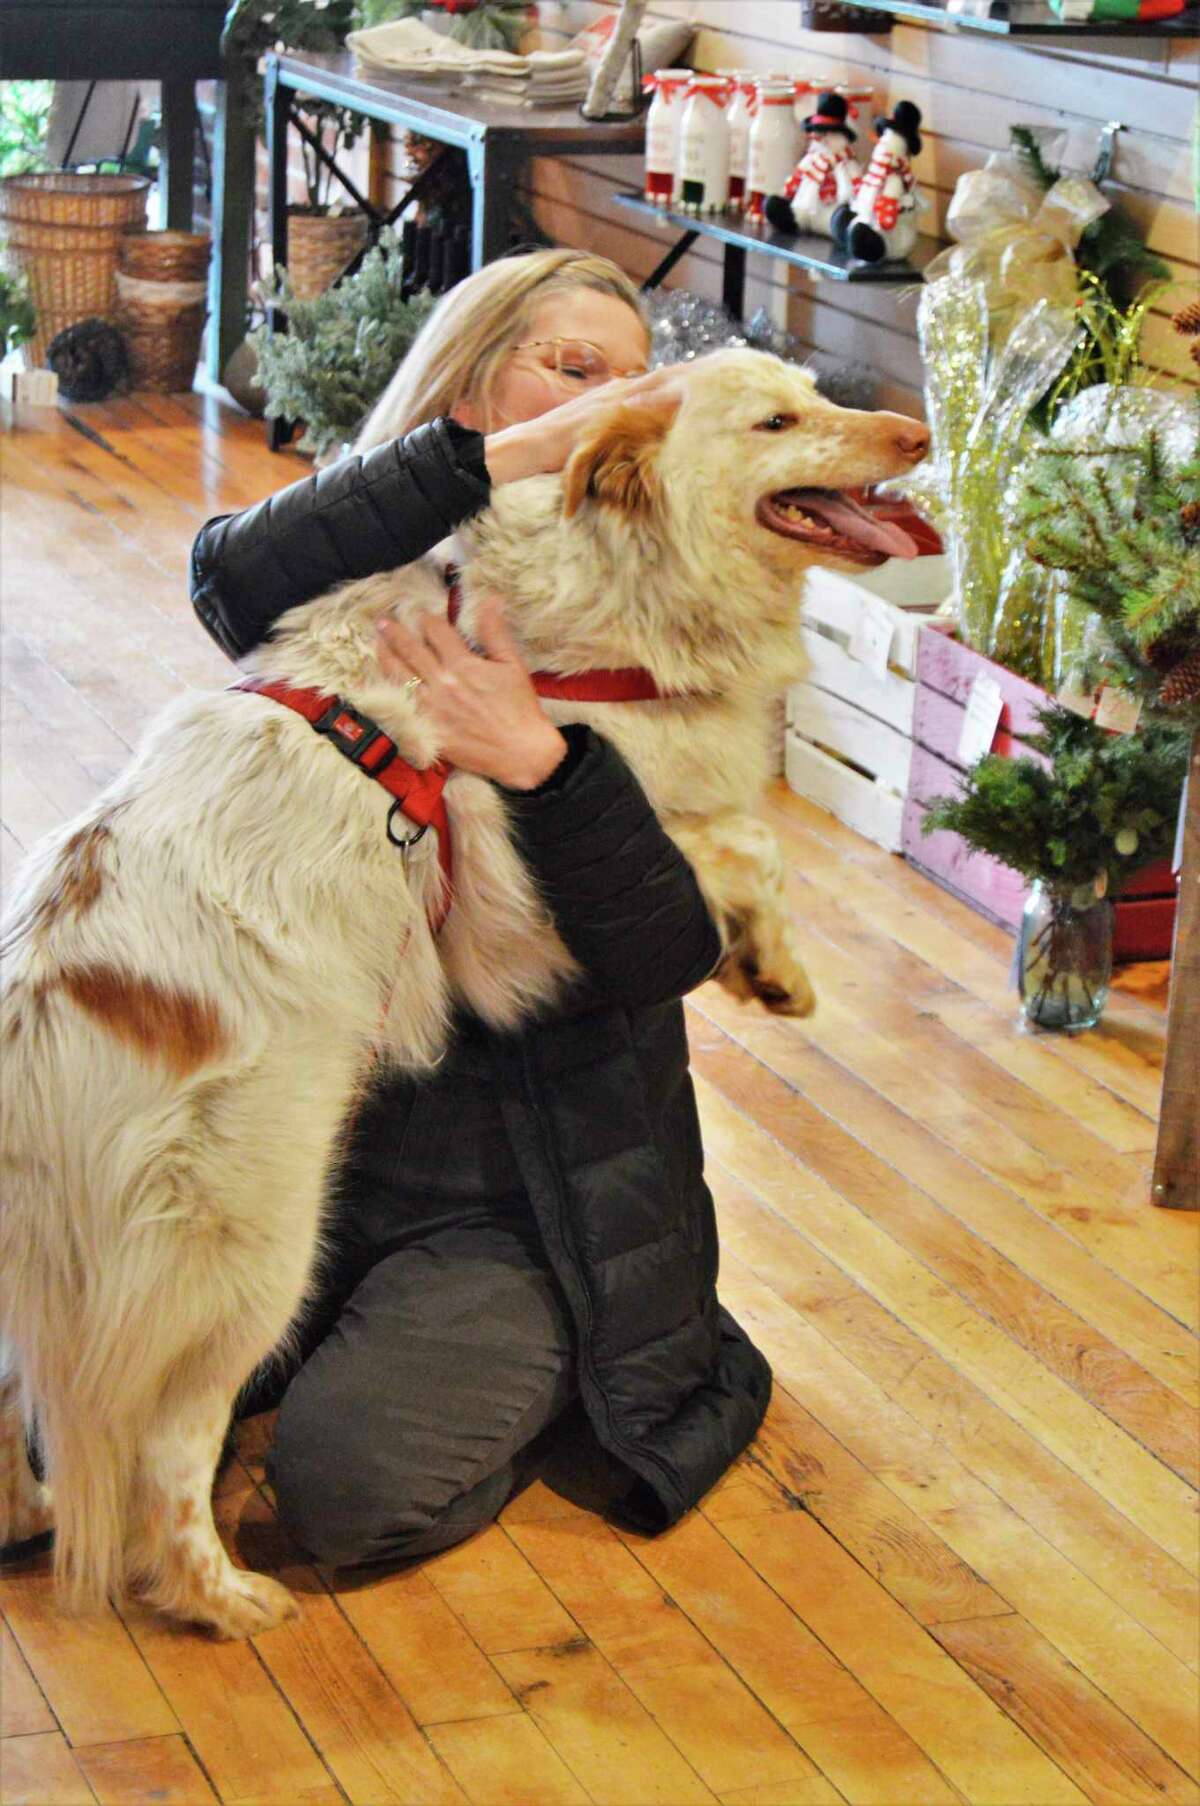 Snowball, and Australian Shepherd dog, loves on Amy Earley, the Midland resident who lured him in and captured him, after he was missing for more than two years. (Ashley Schafer/Ashley.Schafer@hearstnp.com)